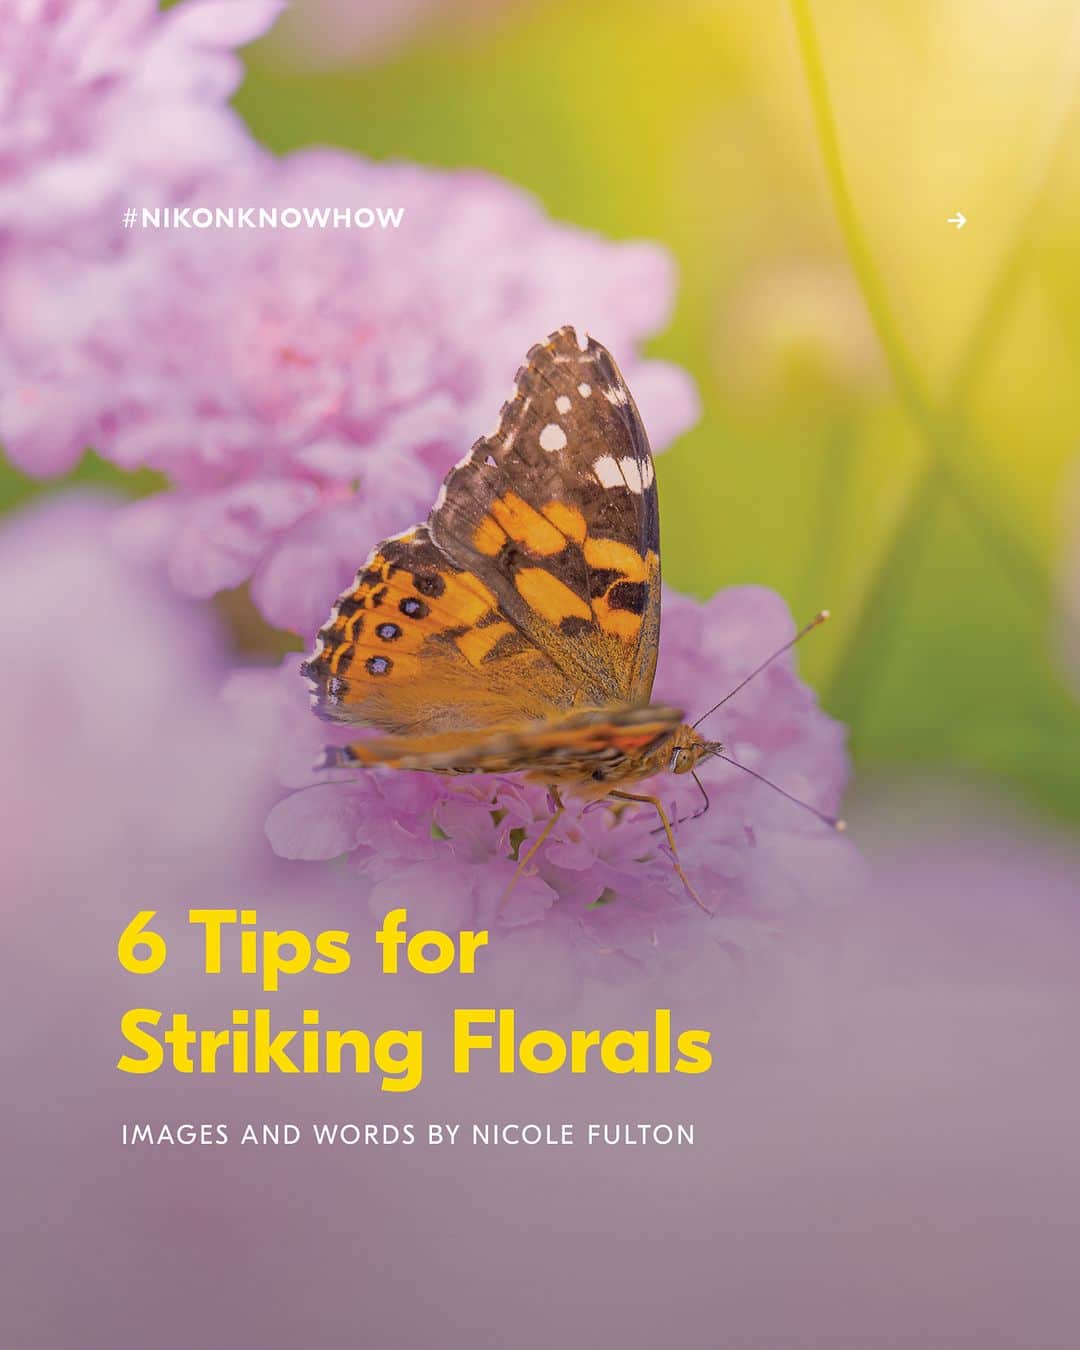 Nikon Australiaのインスタグラム：「Want to know how to take striking photos of florals this Spring?  In today's #NikonKnowHow, @_nicolefultonphotography_ shares her top tips for getting creative with macro photography in your garden this season in her 6 Tips for Striking Florals.   Swipe through to read them all!  #Nikon #NikonAustralia #MyNikonLife #NikonCreators #NikonKnowHow #Zseries #FloralPhotography #MacroPhotography #Australia」